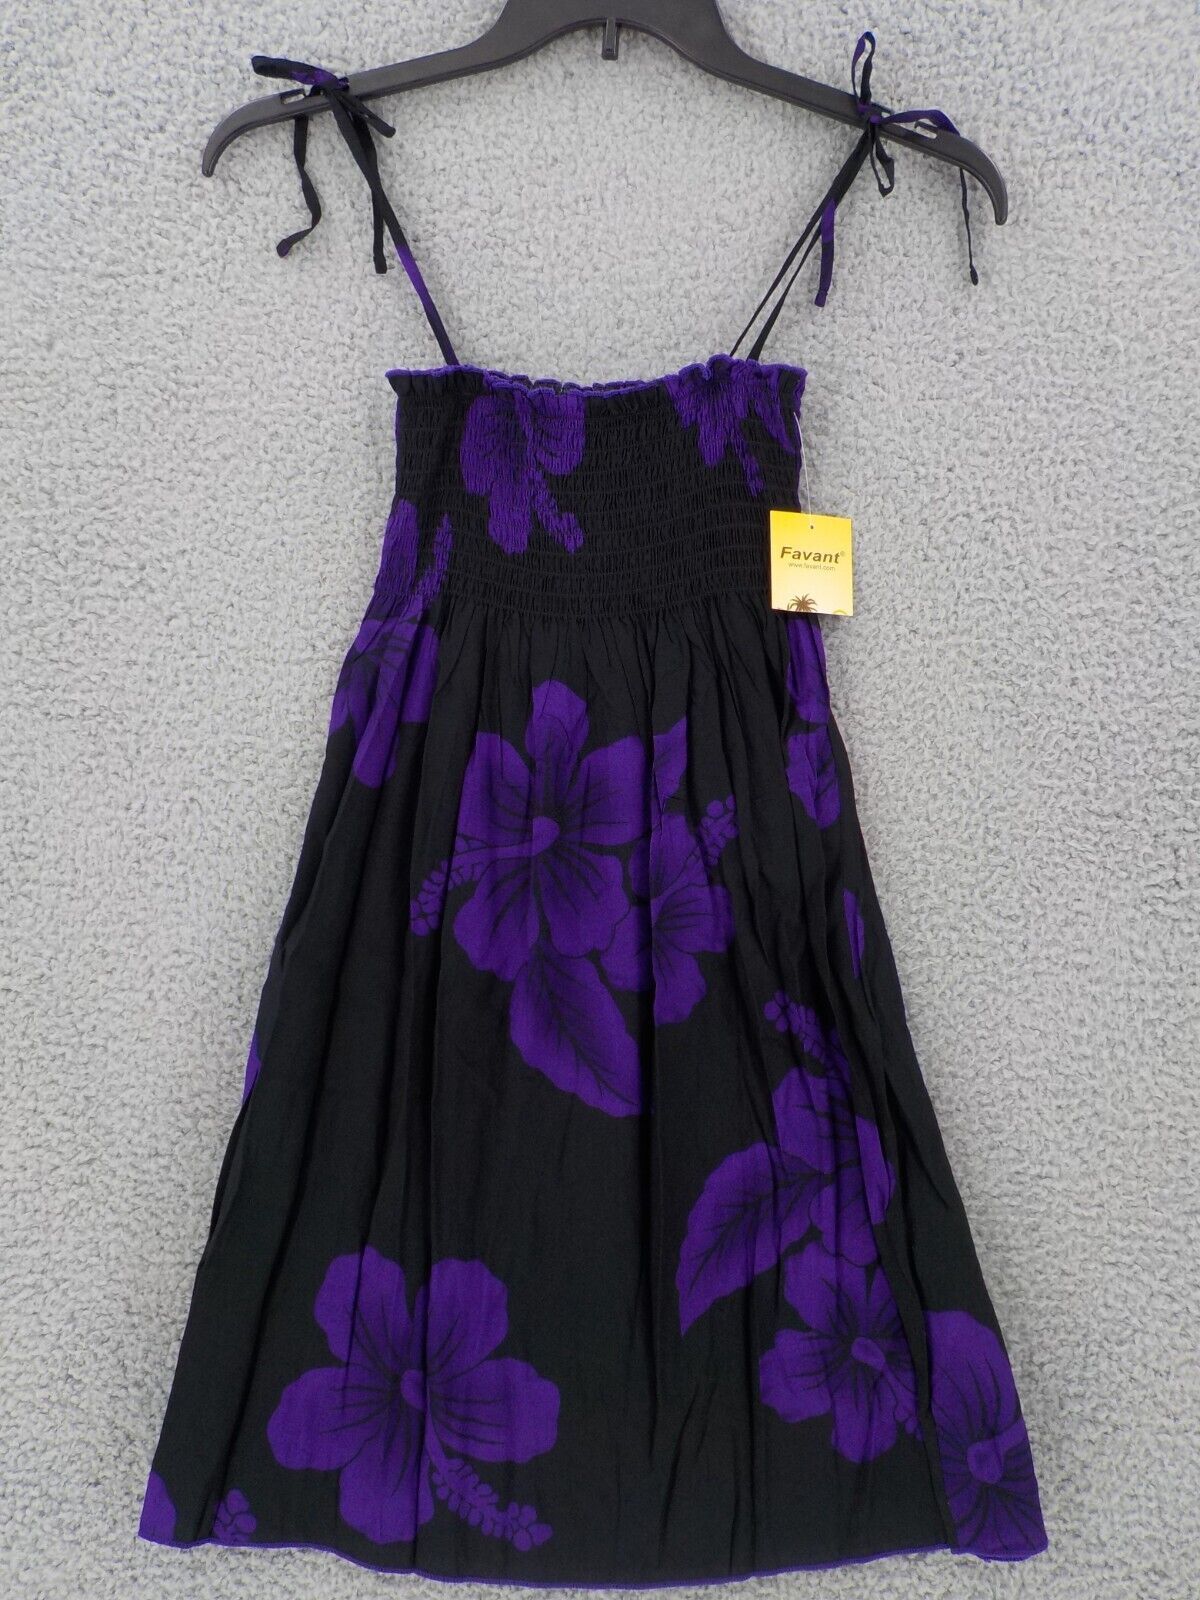 Primary image for FAVANT SPAGHETTI STRAP GIRLS SUNDRESS SZ 10 BLACK PURPLE HIBISCUS FLORAL NWT